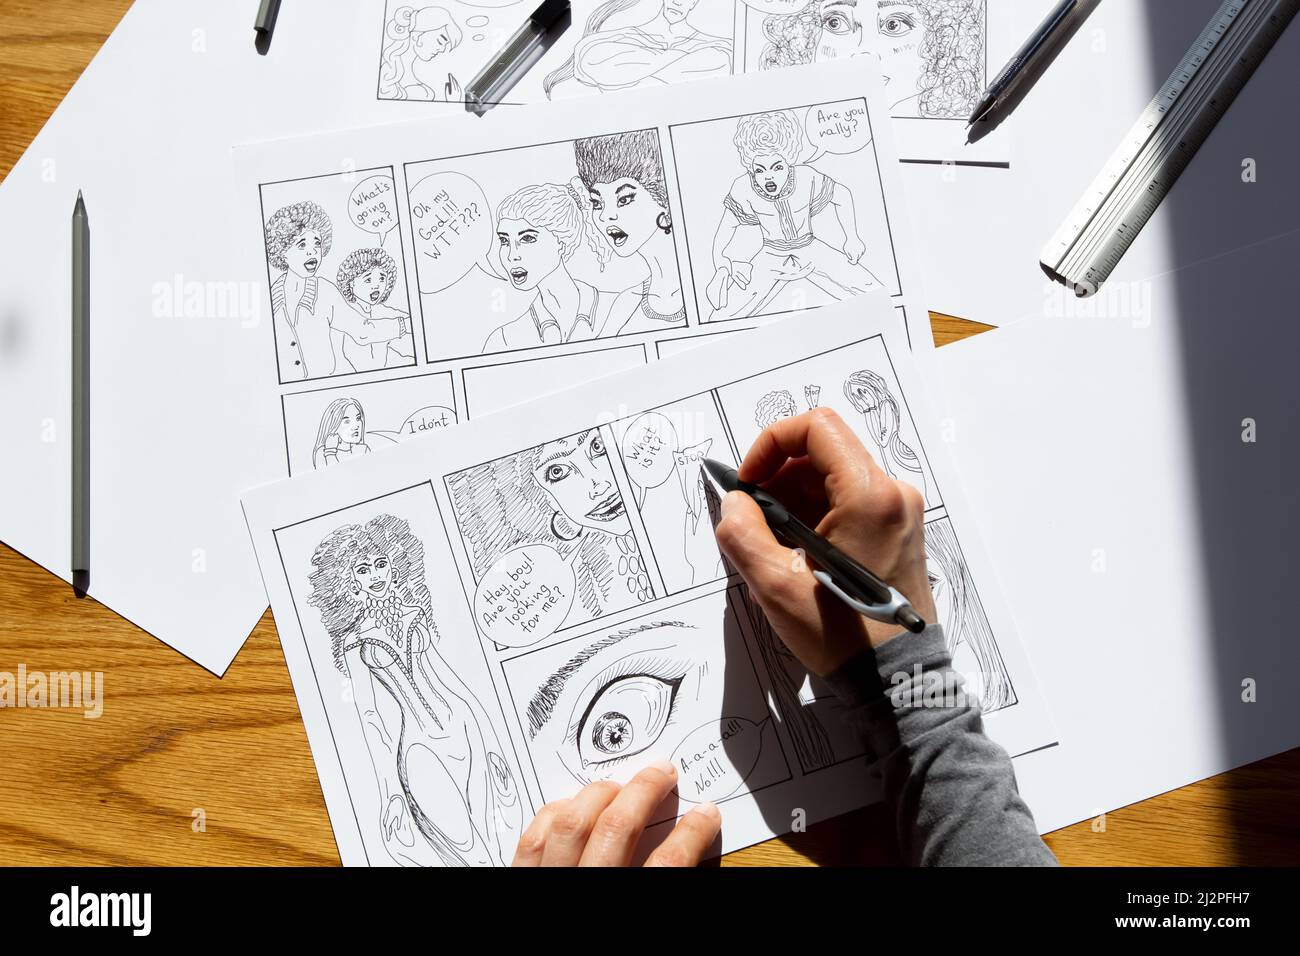 The artist draws frames of comic book characters. An animator designer creates a storyboard. Stock Photo